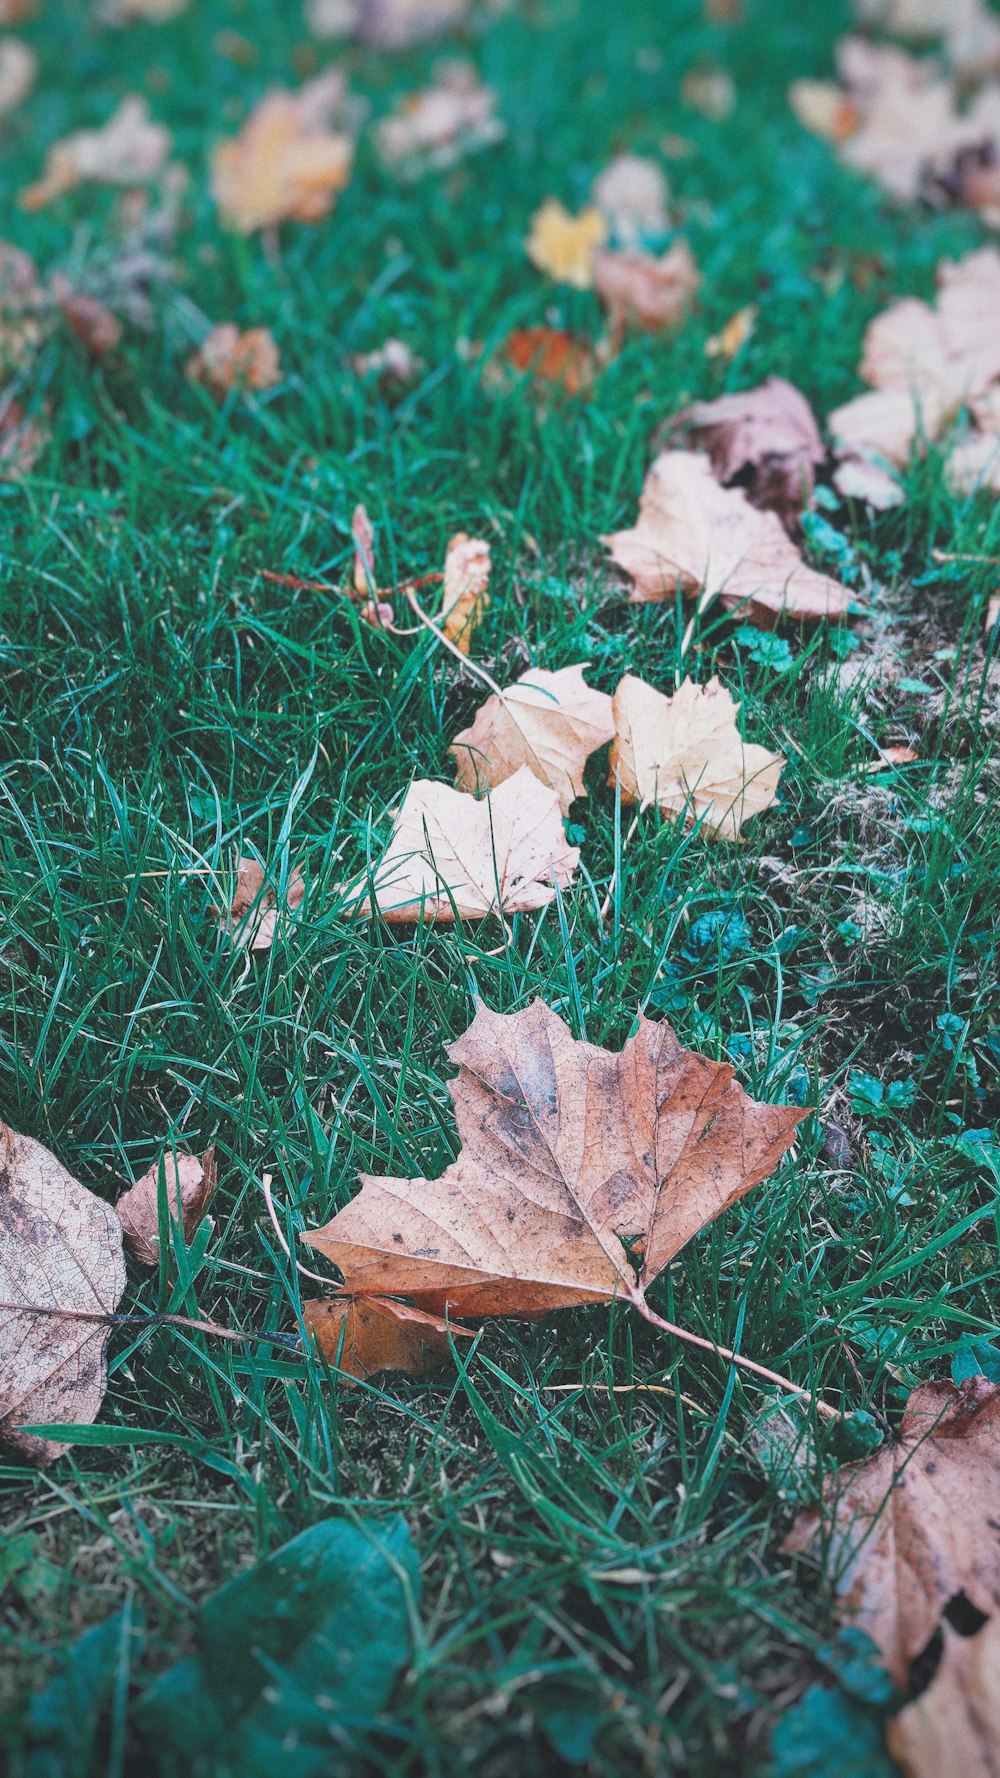 Many leaves sitting in the grass.